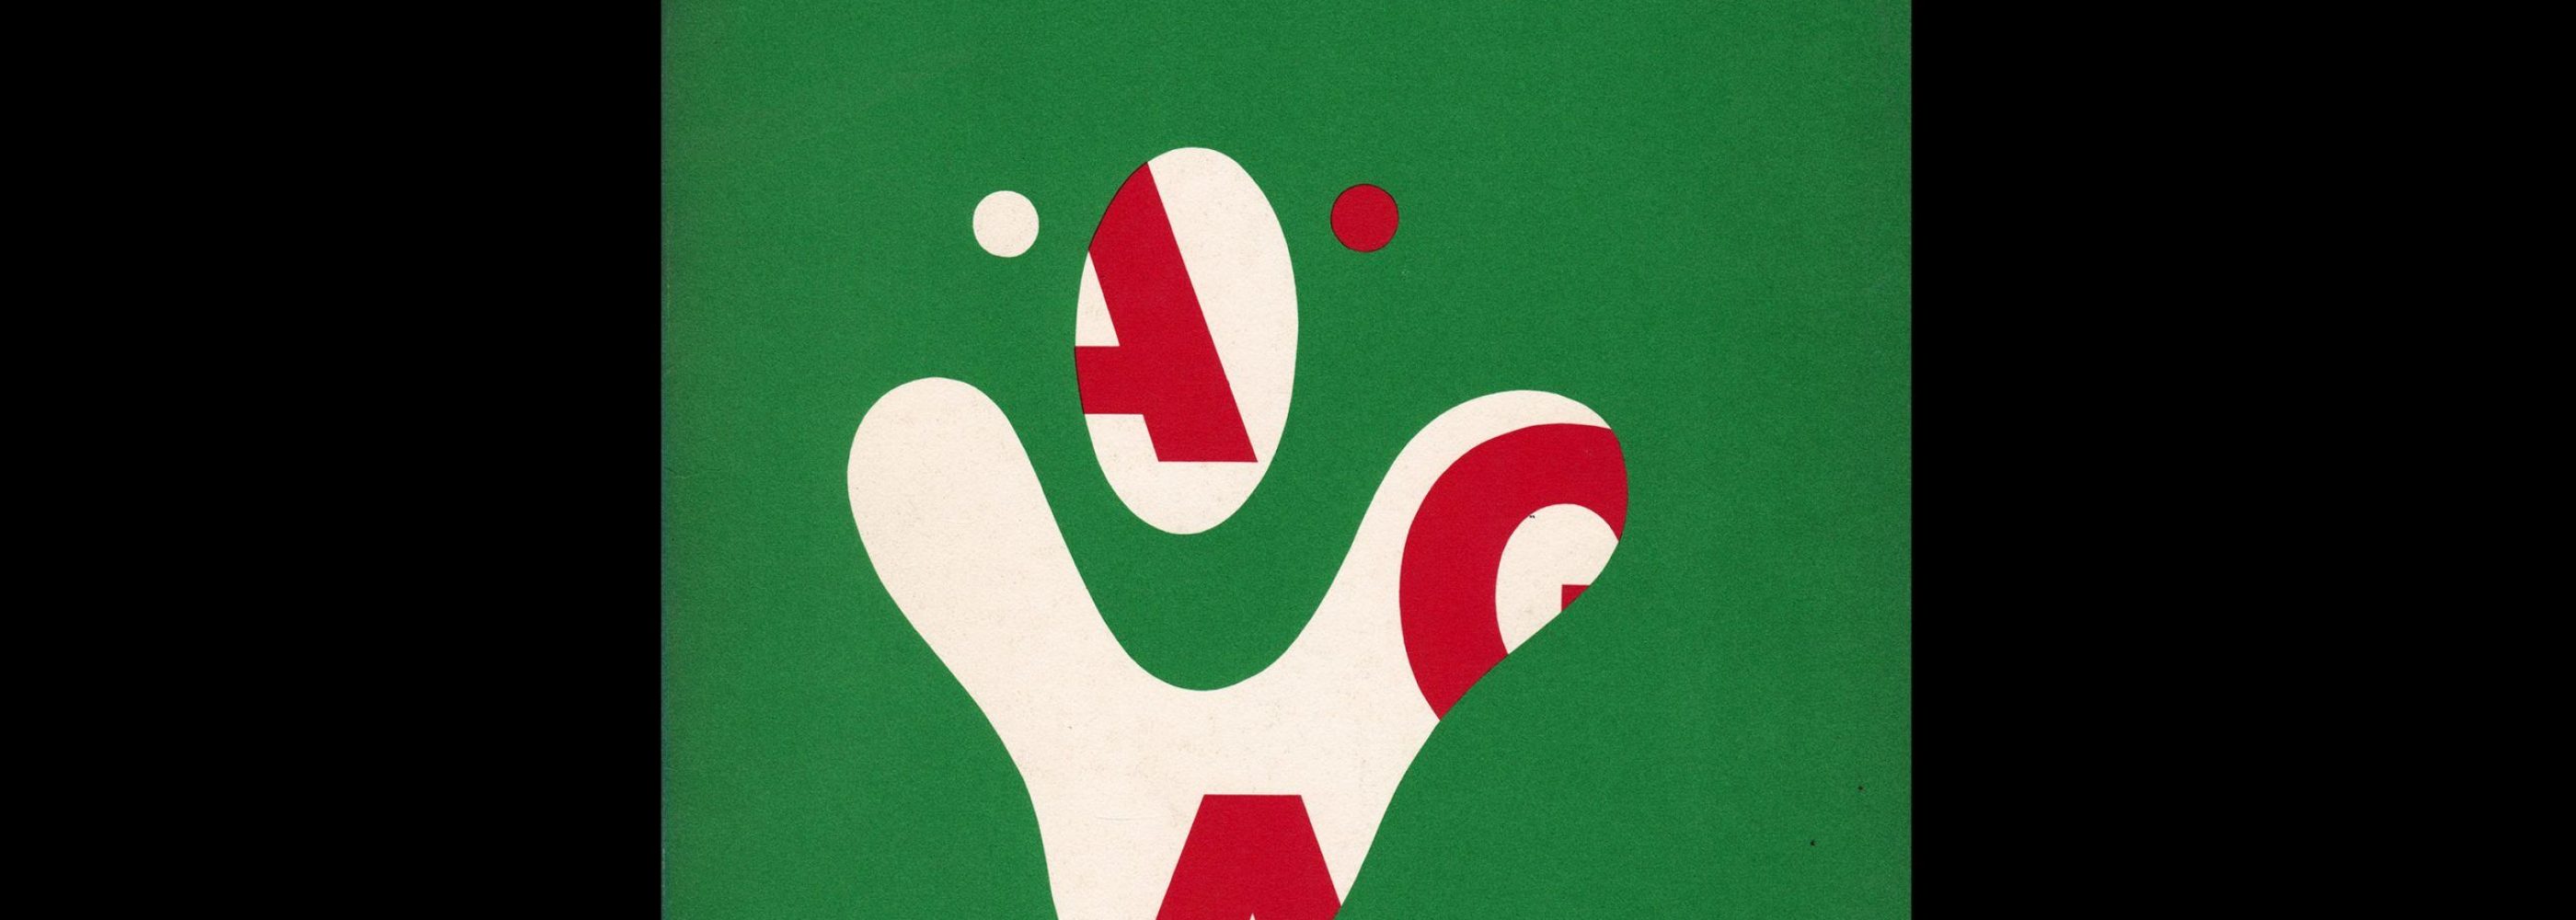 Journal of The American Institute of Graphic Arts, 6, 1969 cover design by Paul Rand